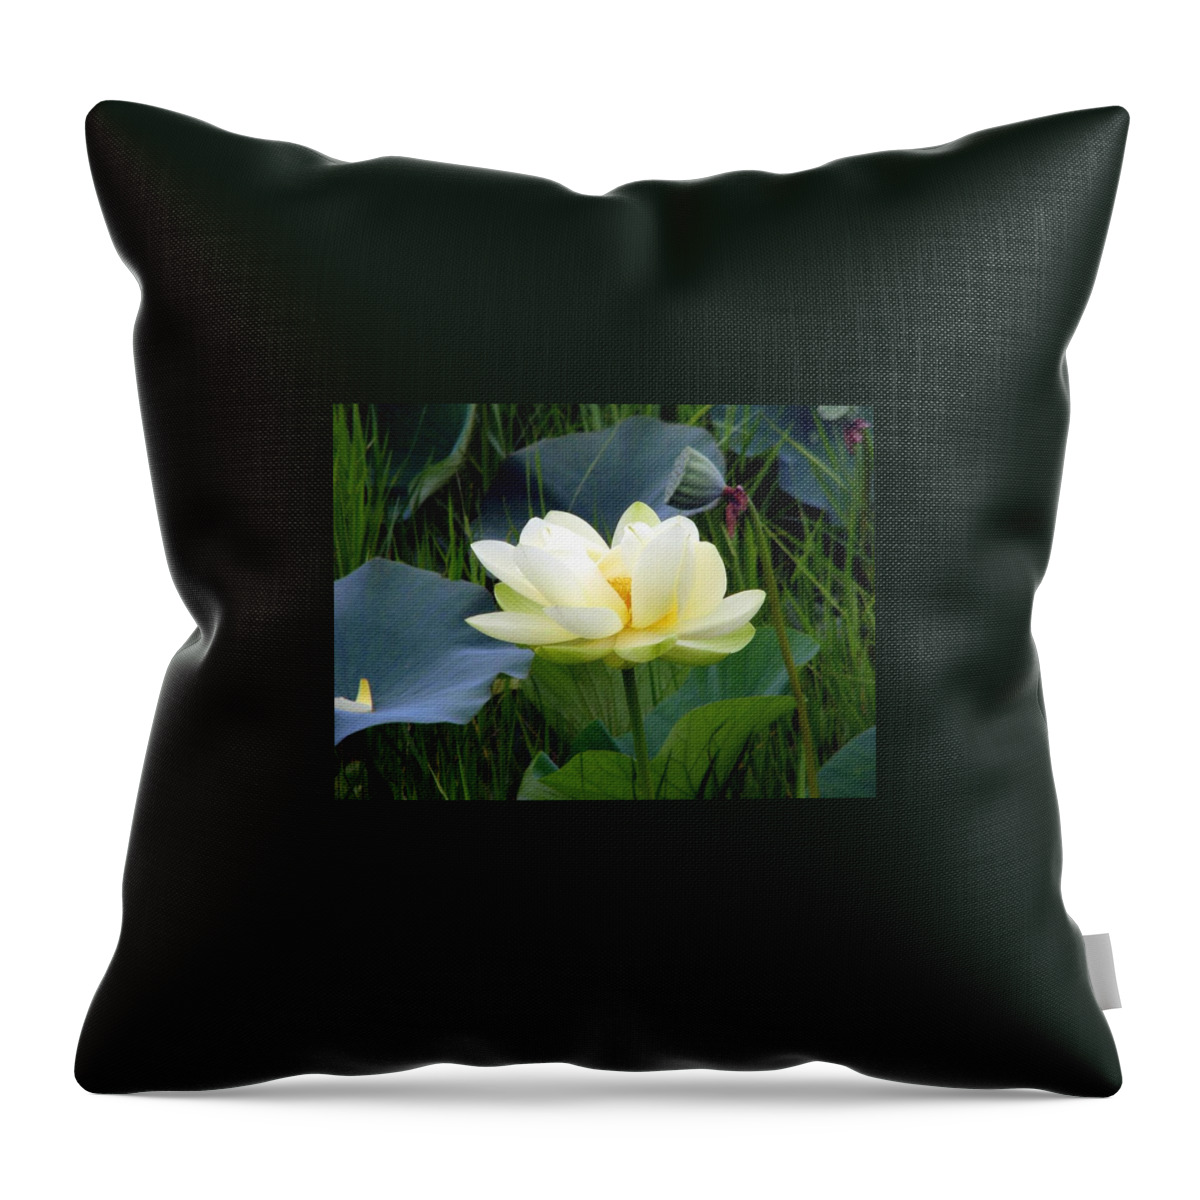 Water Throw Pillow featuring the photograph Yellow Water Lily by Farol Tomson